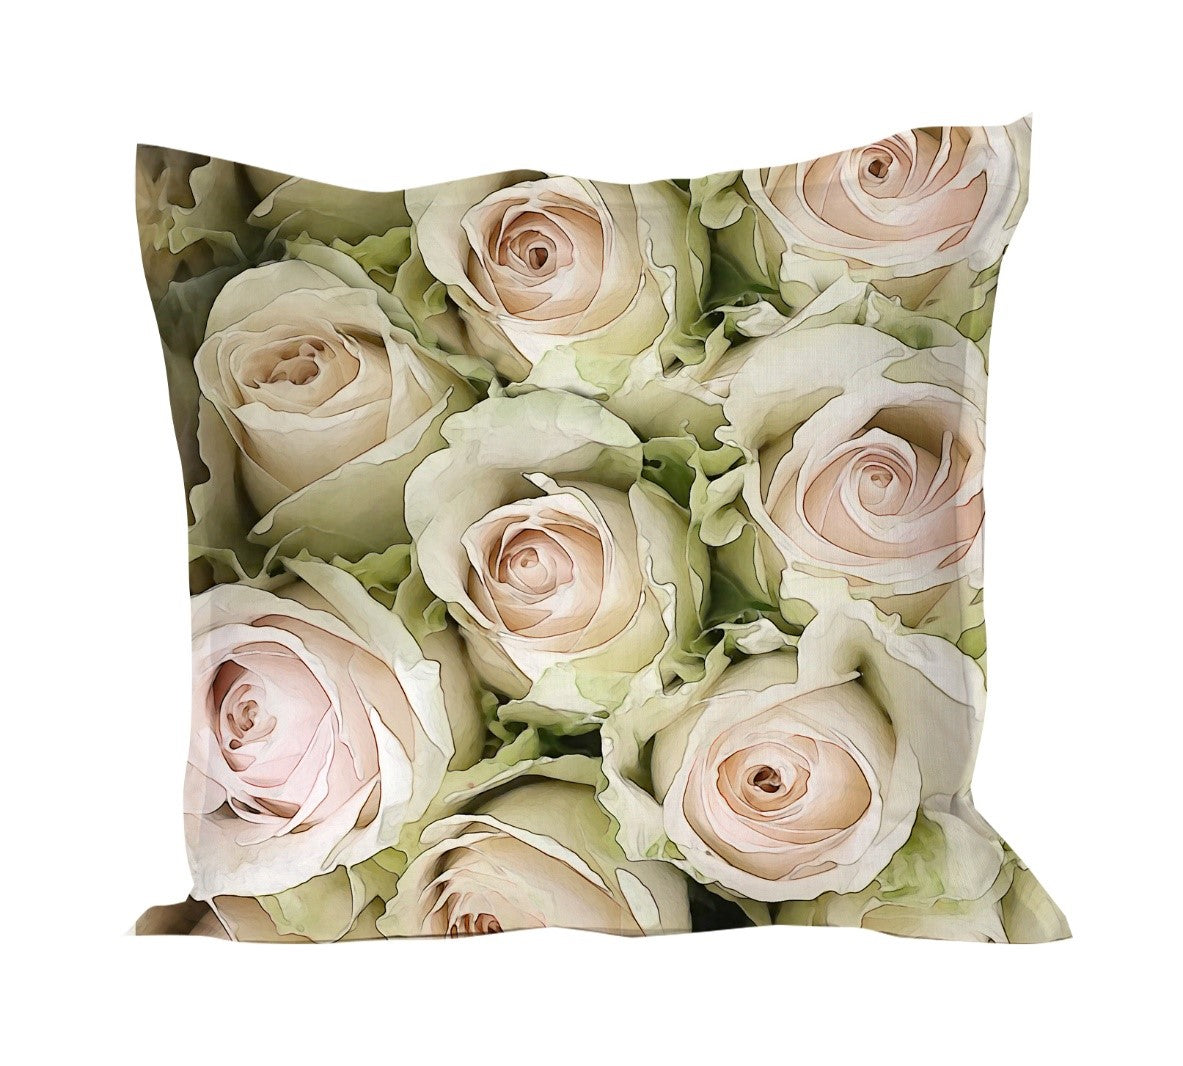 Cushion cover in Rose Vintage